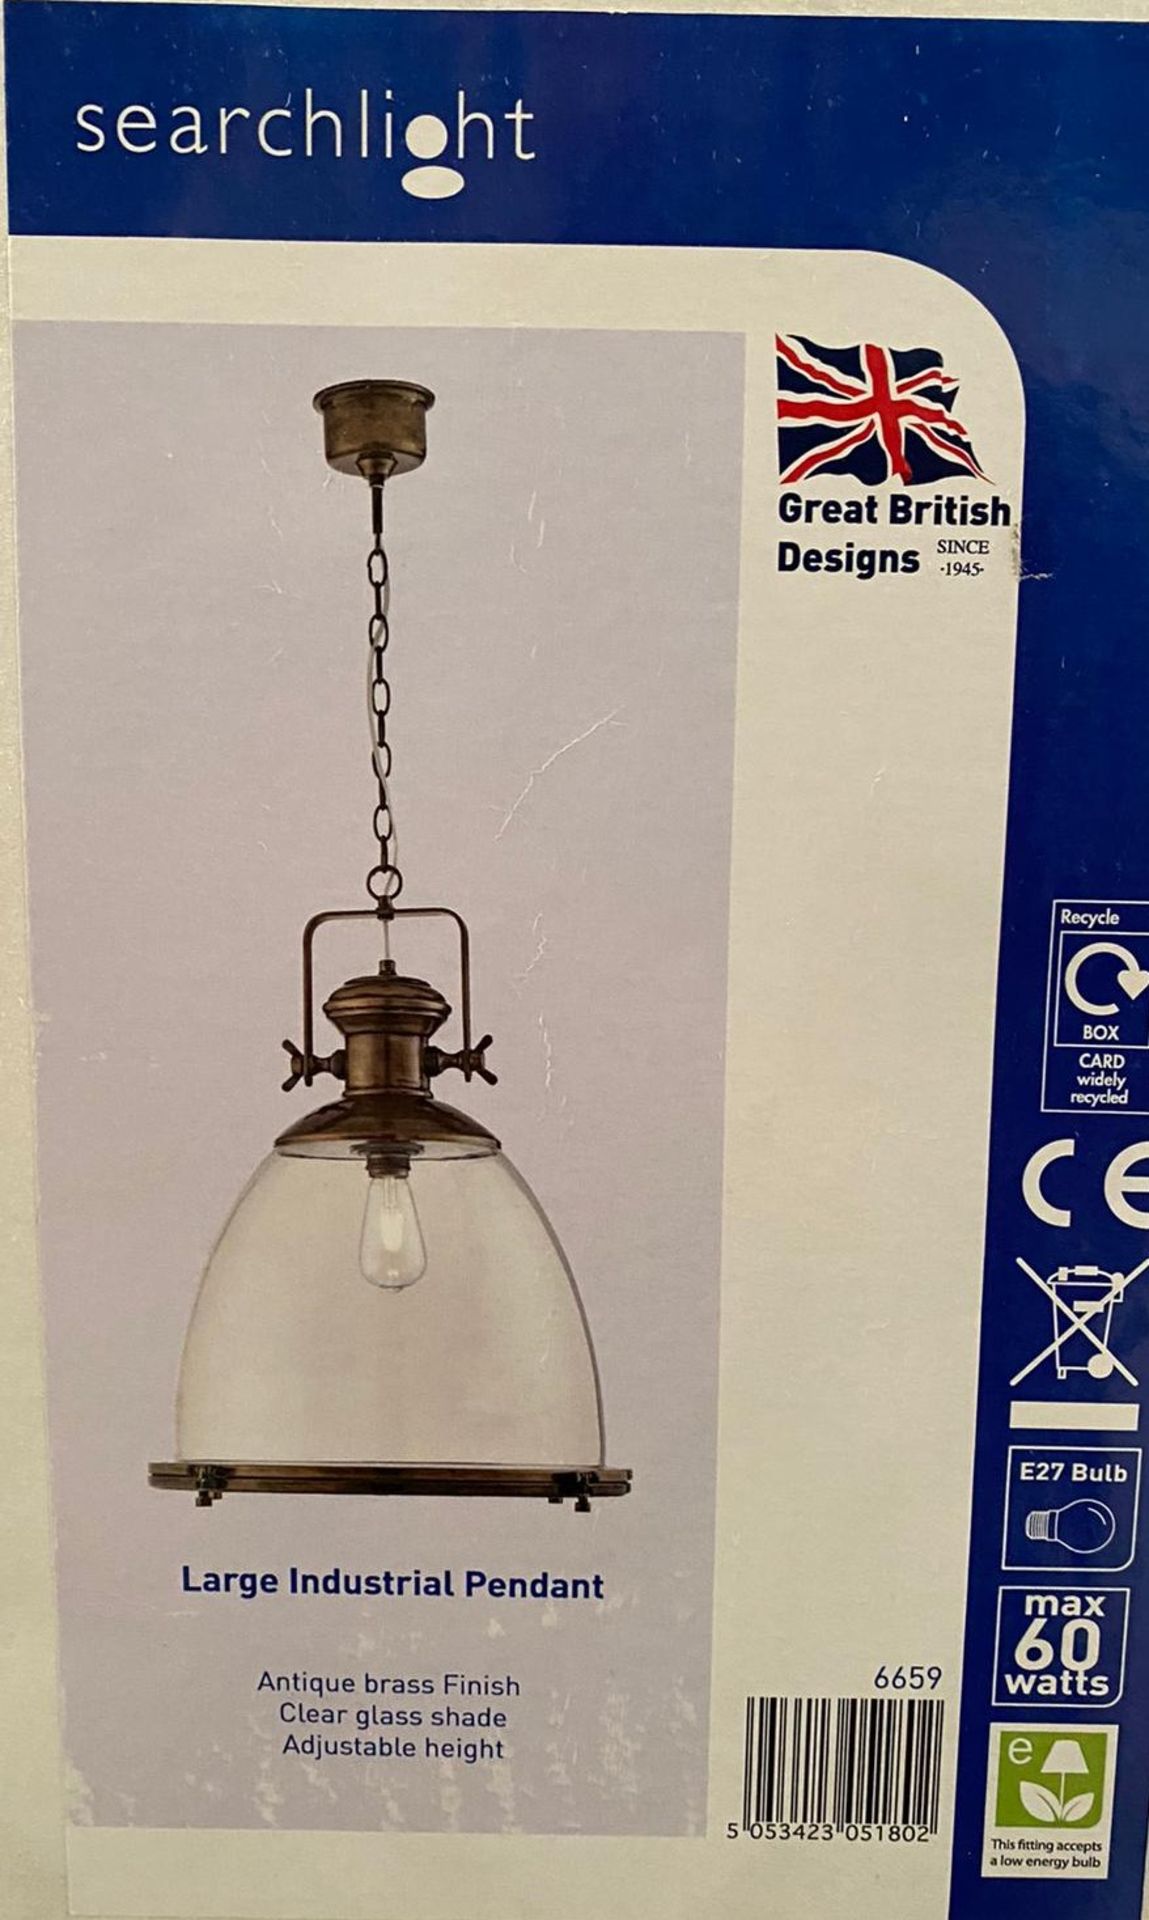 1 x Searchlight Large Industrial Pendant in Antique Brass - Ref: 6659 - New and Boxed - RRP: £550